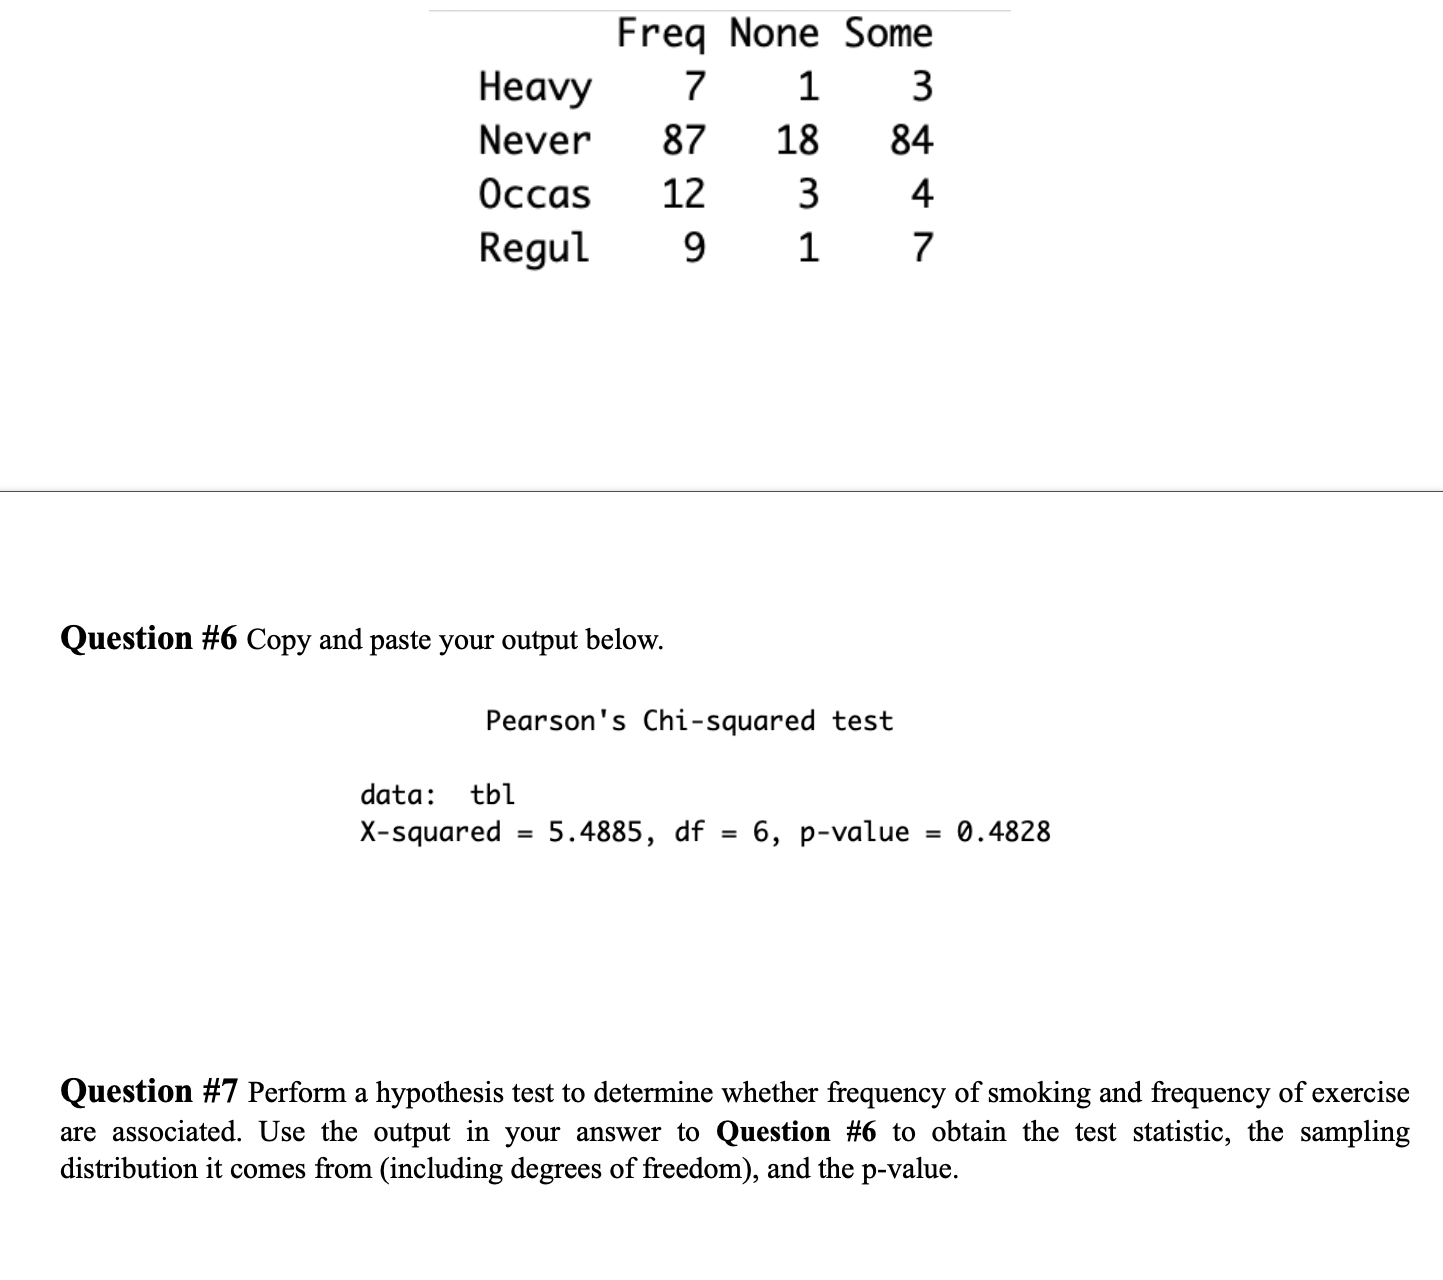 Frea None Some
71 3
84
Occas 12 34
Regul91 7
Heavy
Never 8718
Question #6 Copy and paste your output below.
Pearson's Chi-squared test
data tbl
x-squared 5.4885, df-6, p-value -0.4828
Question #7 Perform a hypothesis test to determine whether frequency of smoking and frequency of exercise
are associated. Use the output in your answer to Question #6 to obtain the test statistic, the sampling
distribution it comes from (including degrees of freedom), and the p-value.
